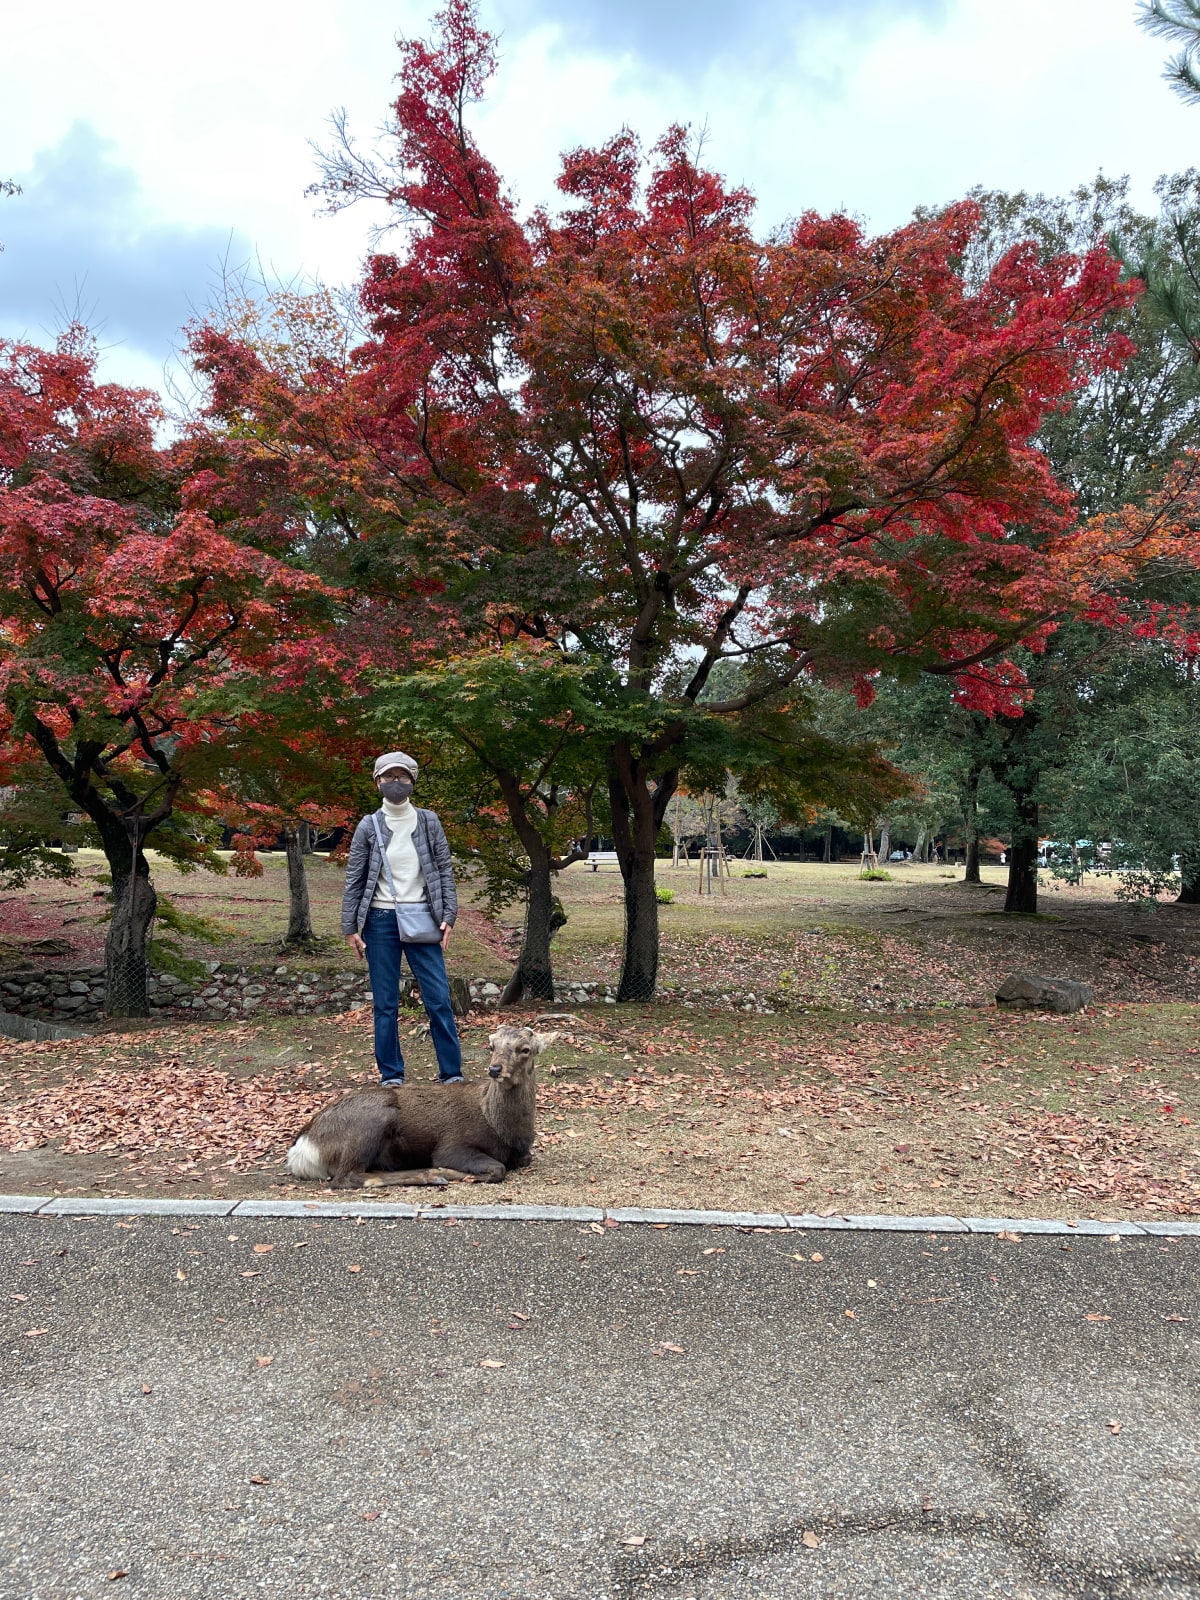 My mom (standing) and a male deer (sitting) in front of some fall leaves in Nara Park.